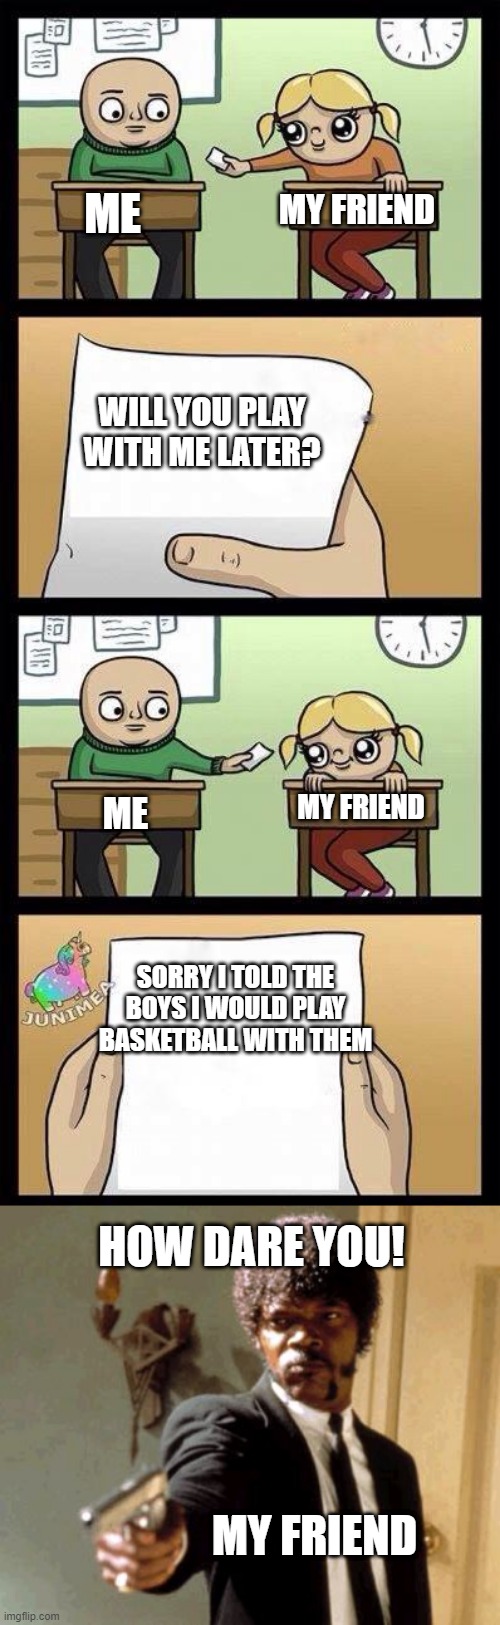 ME; MY FRIEND; WILL YOU PLAY WITH ME LATER? MY FRIEND; ME; SORRY I TOLD THE BOYS I WOULD PLAY BASKETBALL WITH THEM; HOW DARE YOU! MY FRIEND | image tagged in memes,say that again i dare you,asdddddddddddd | made w/ Imgflip meme maker